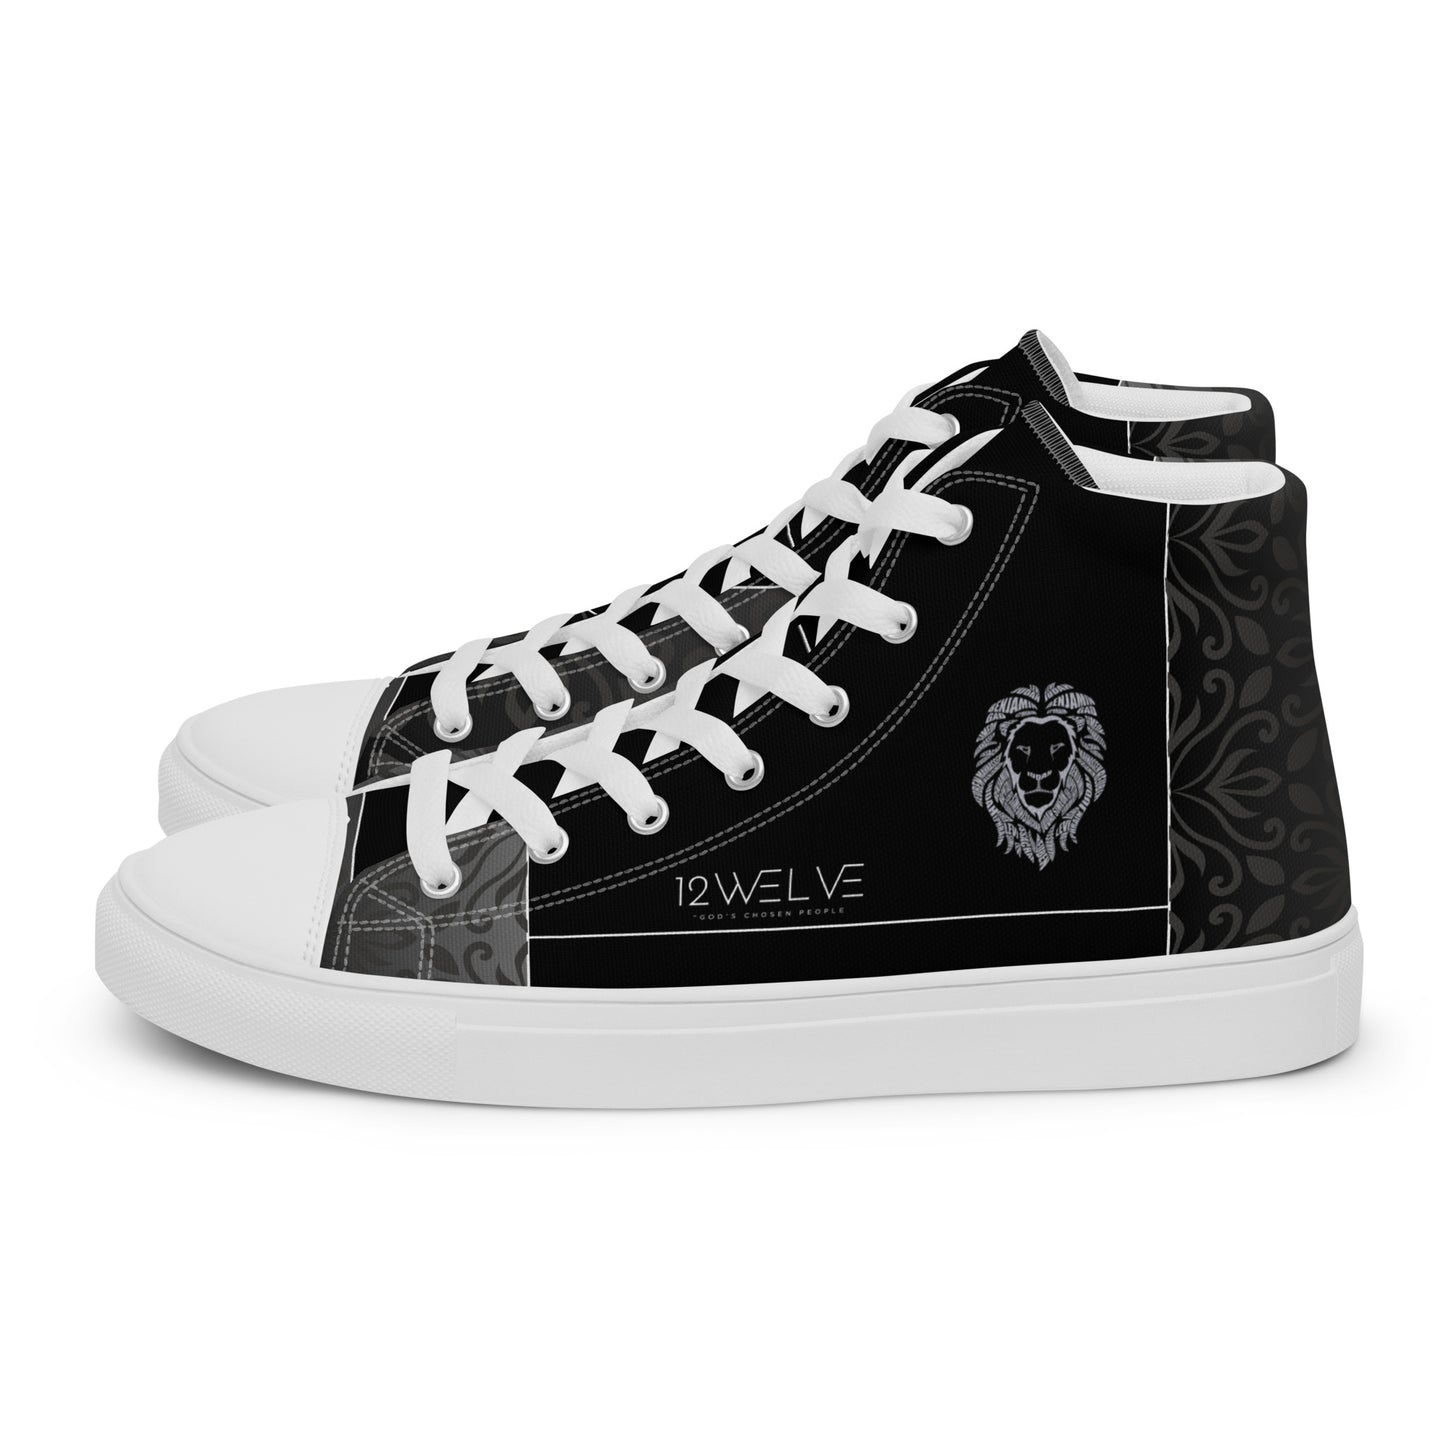 Women’s Stylized Floral Pattern High Top Shoes